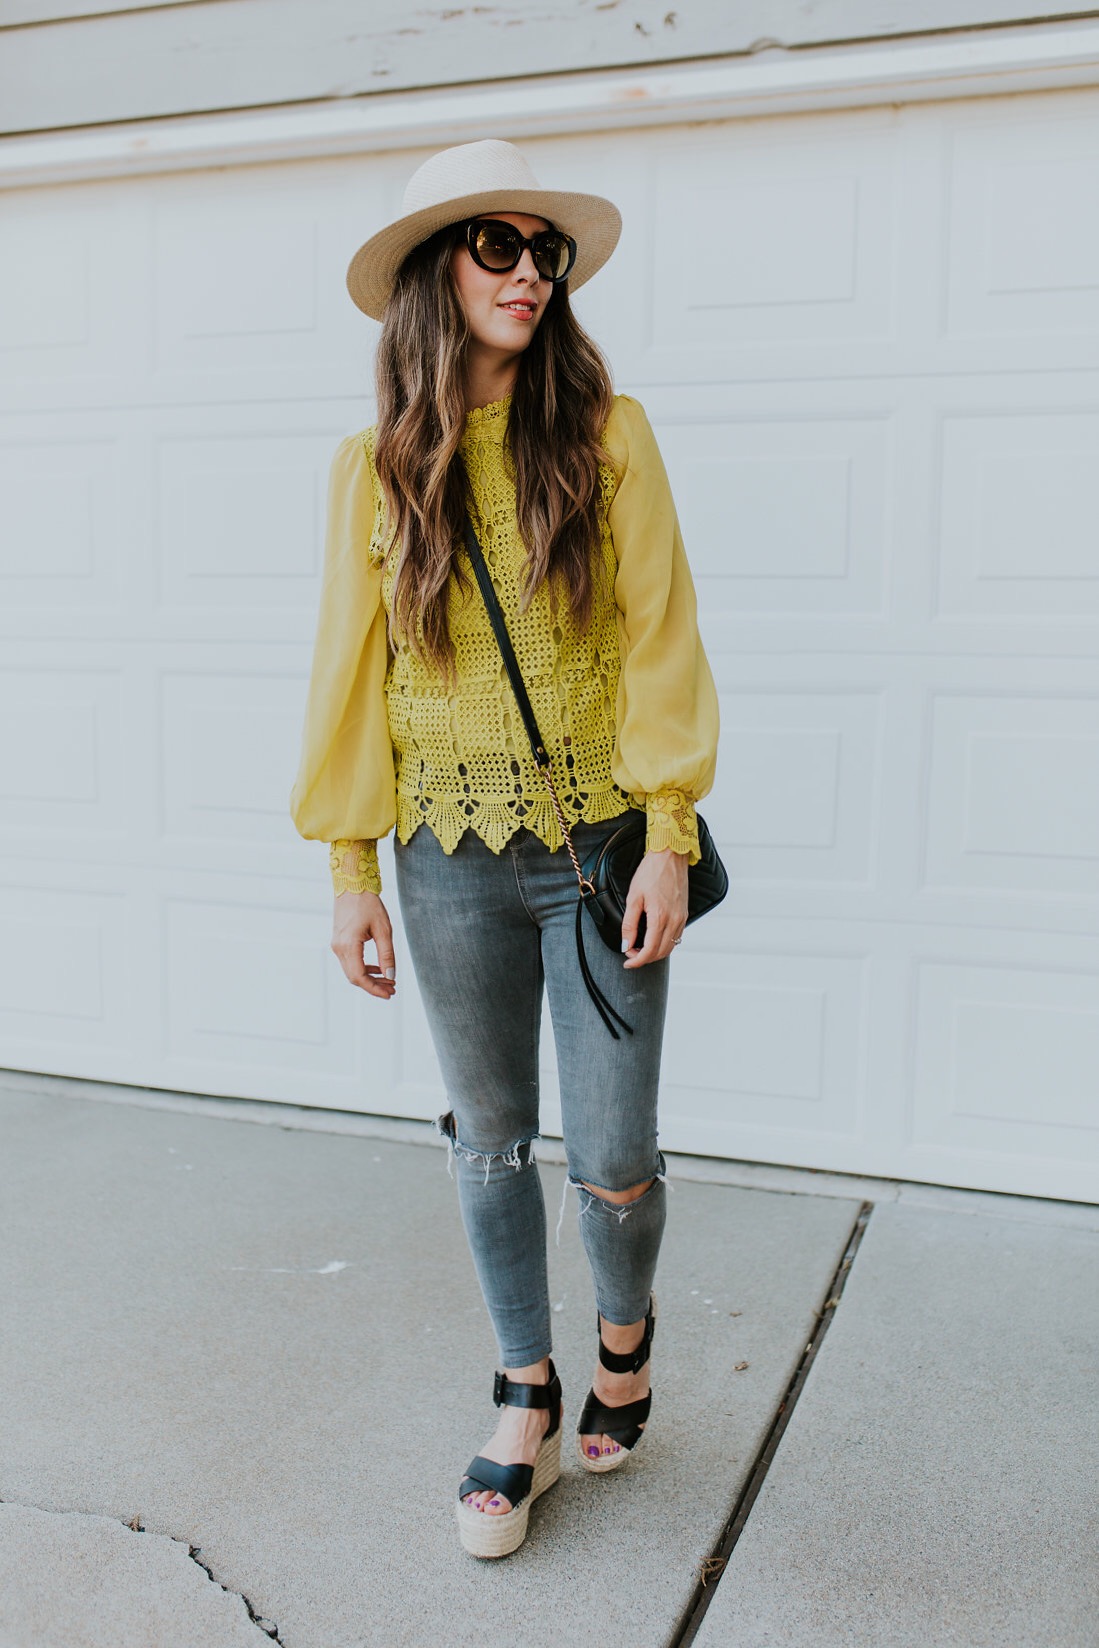 Summer Yellow Top | The Girl in the Yellow Dress